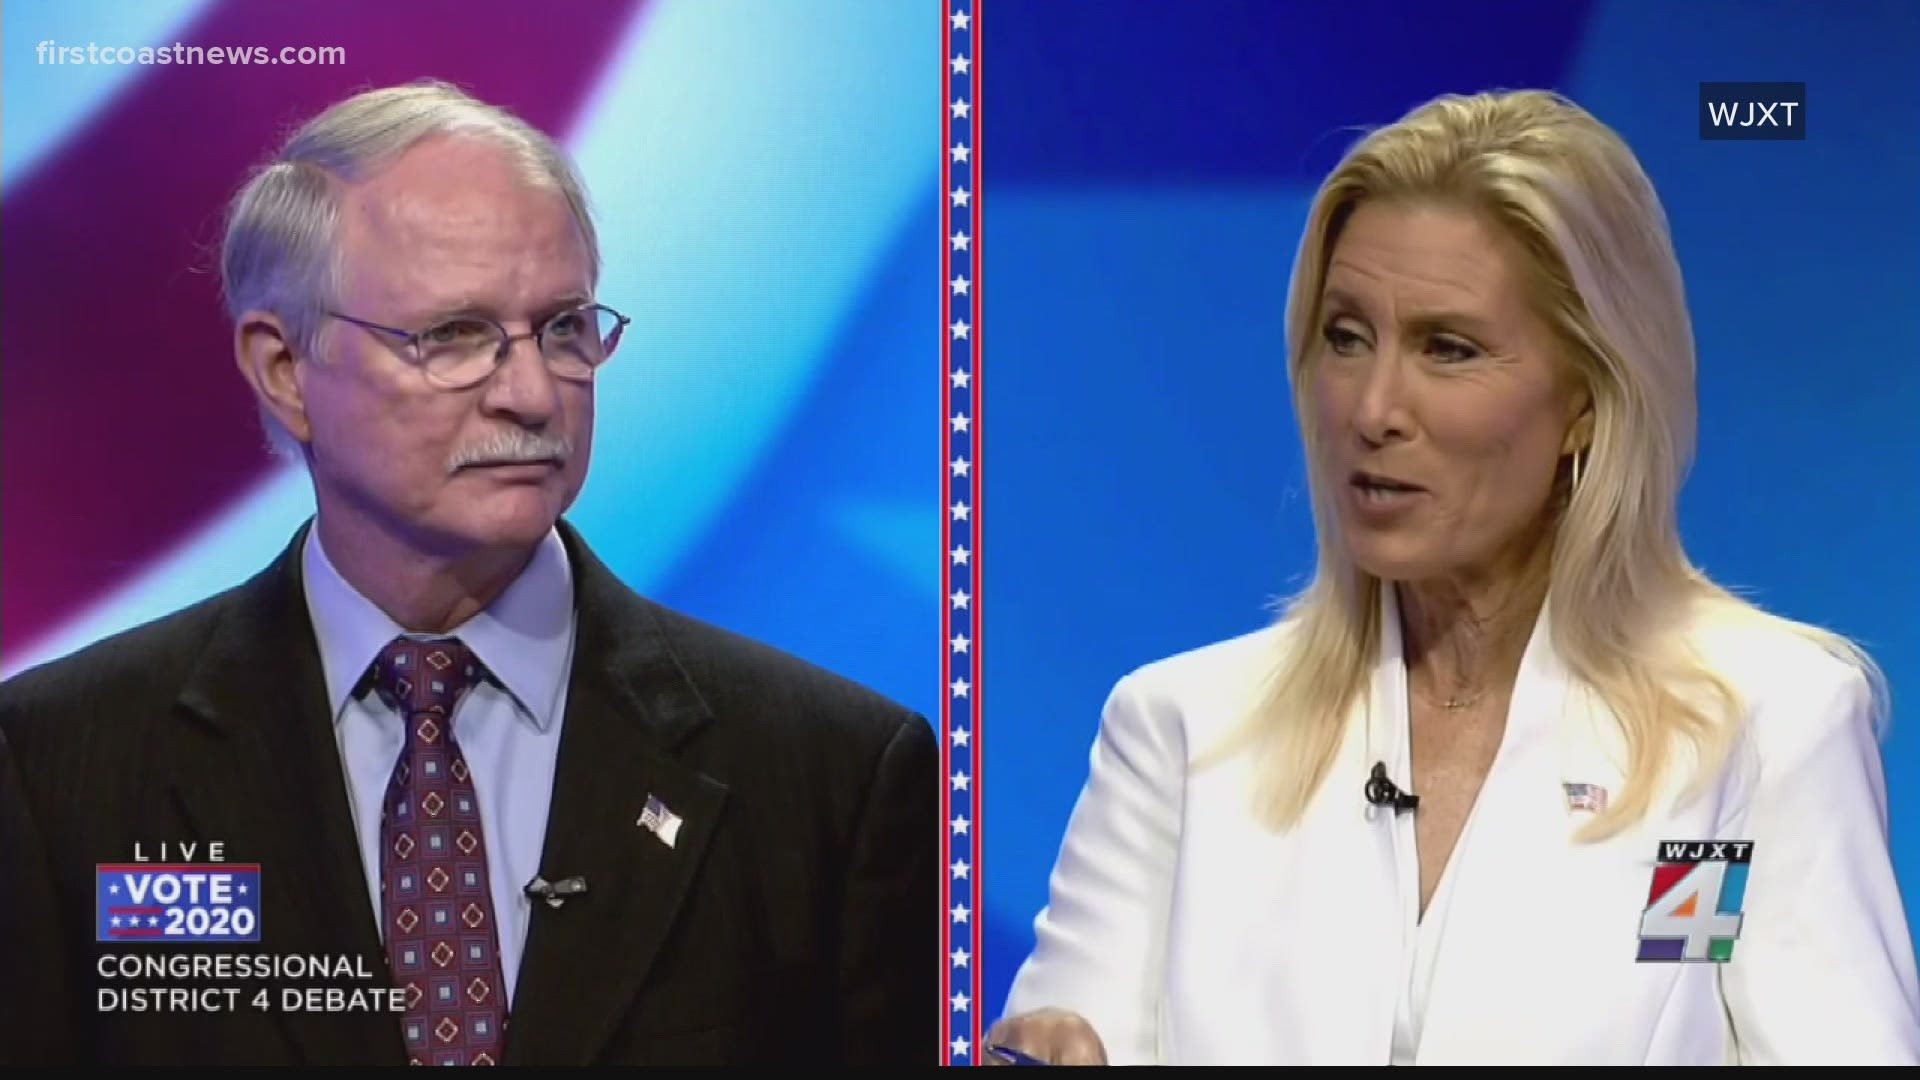 The two candidates running for the fourth congressional district seat in Florida faced off in their first and only debate.